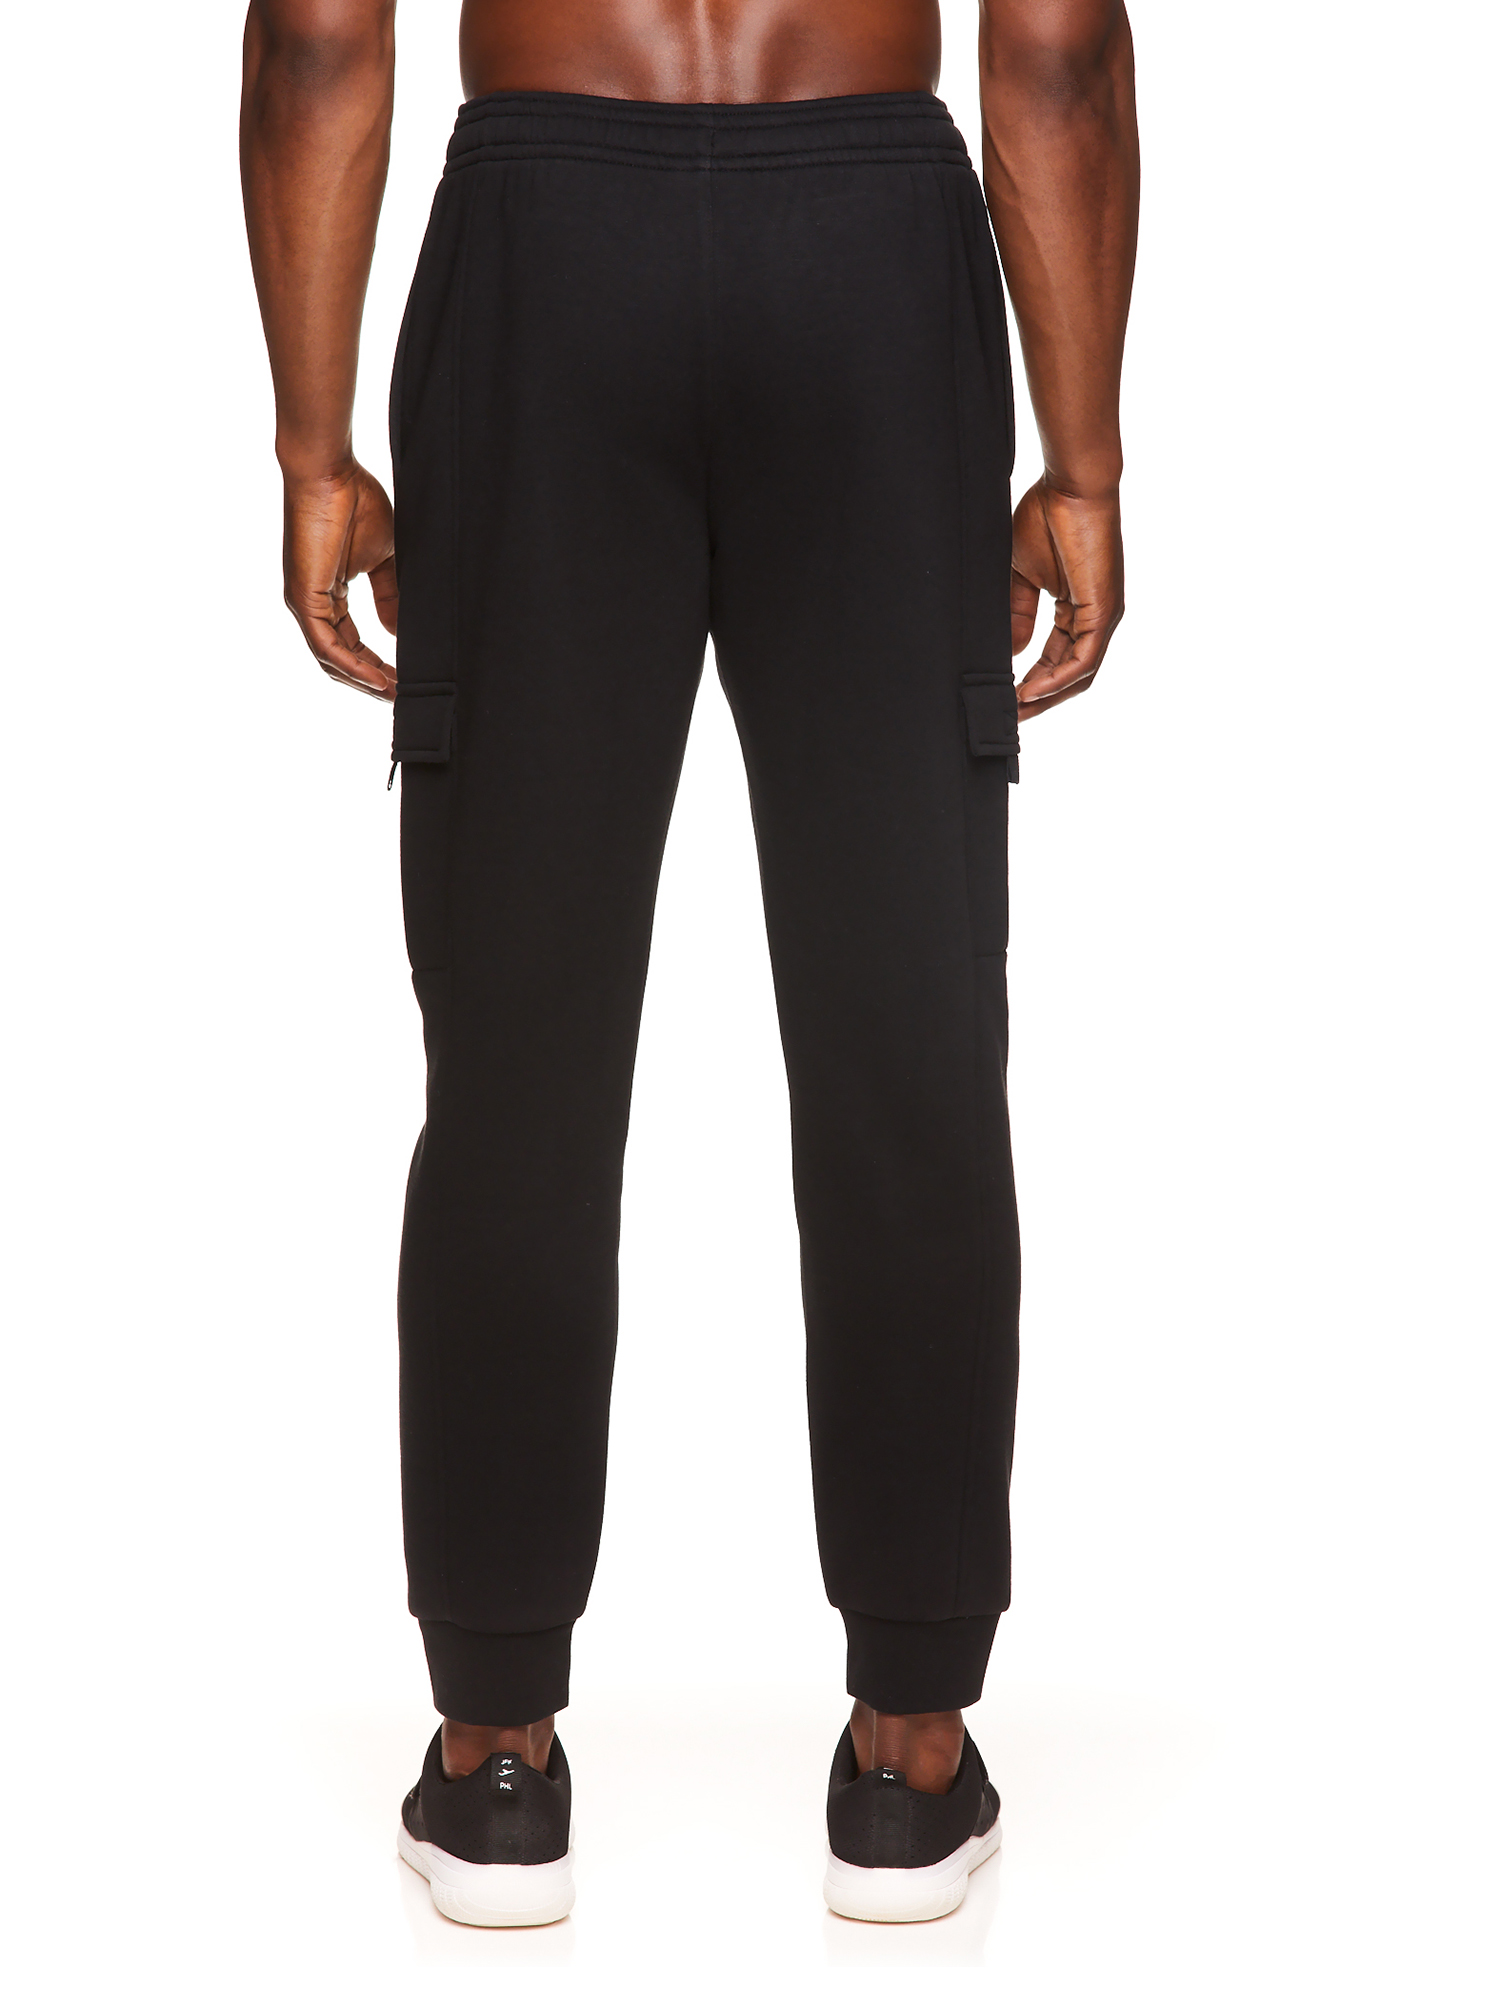 AND1 Men's And Big Men's Active Double Team 3.0 Basketball Jogger, up ...